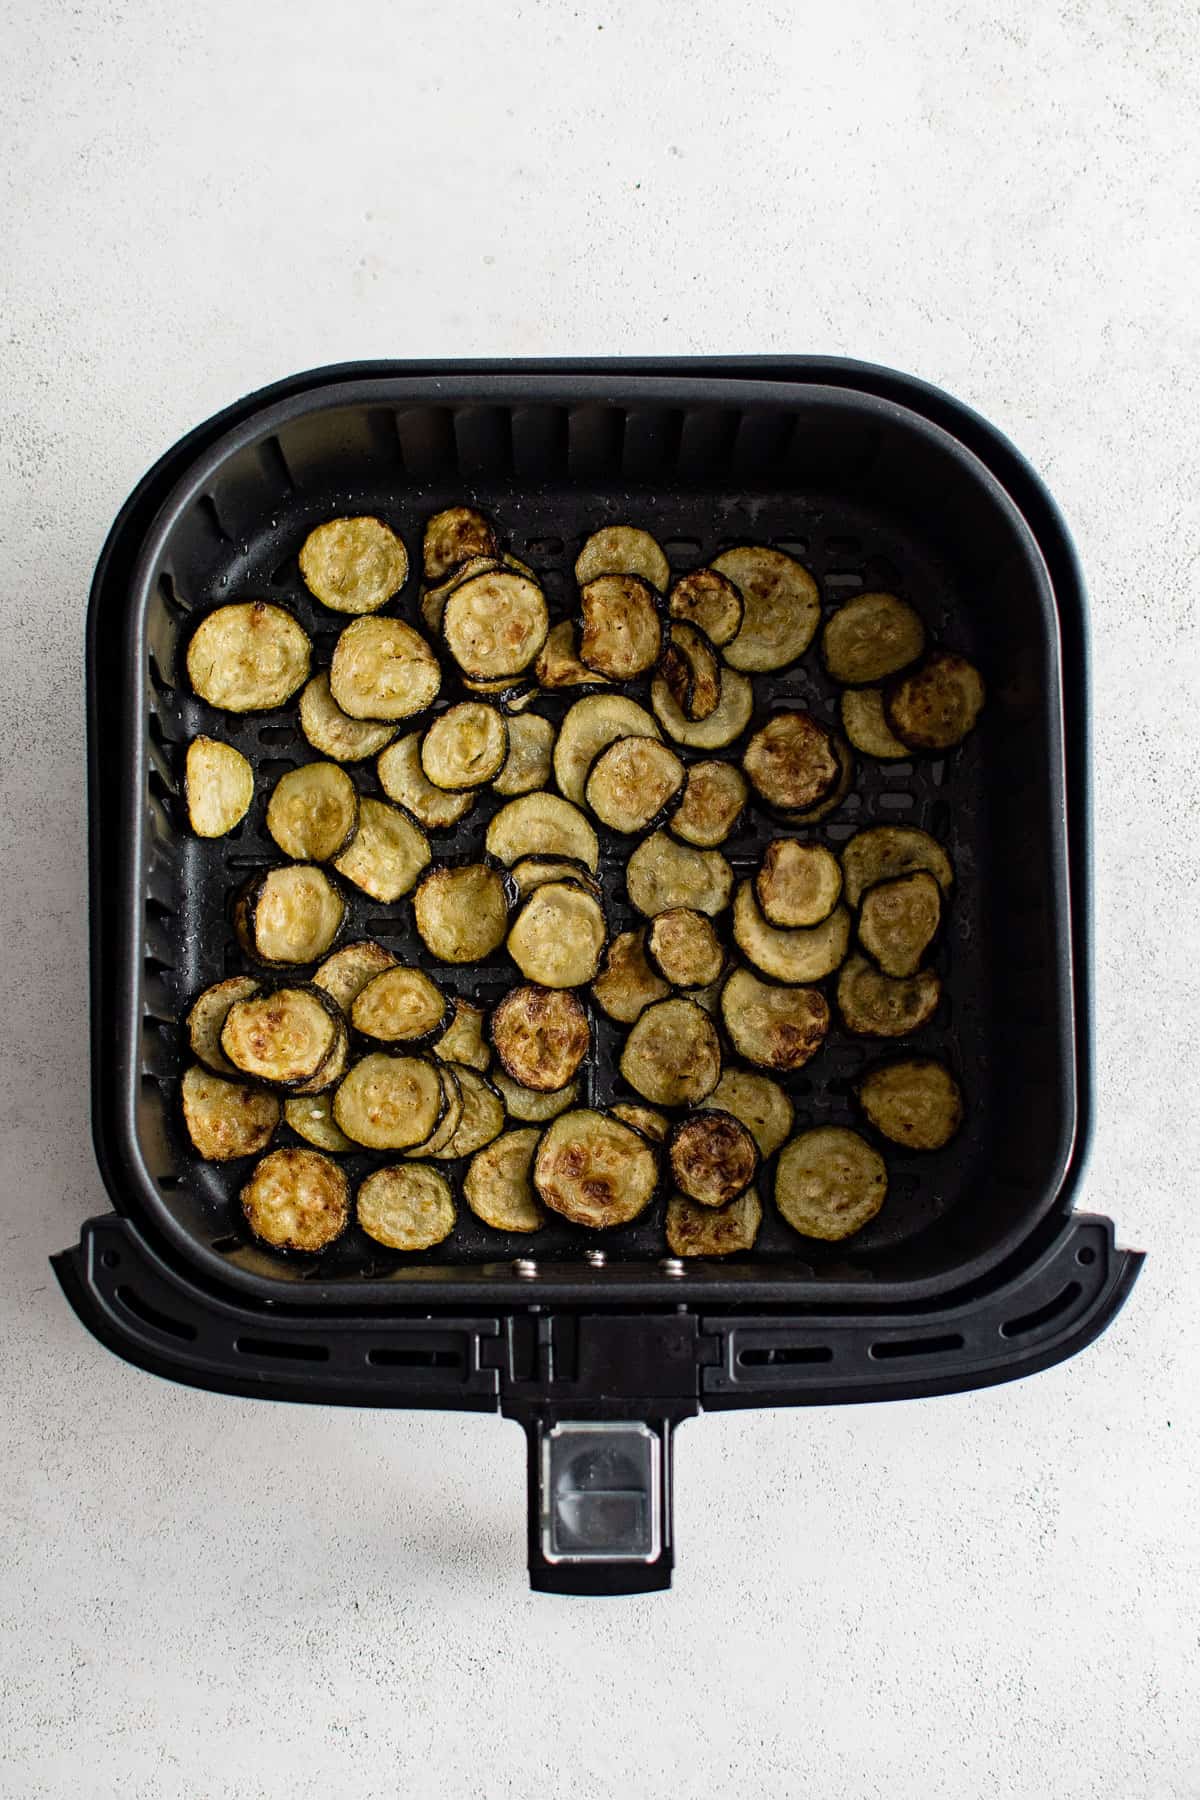 sliced and cooked zucchini in the air fryer.